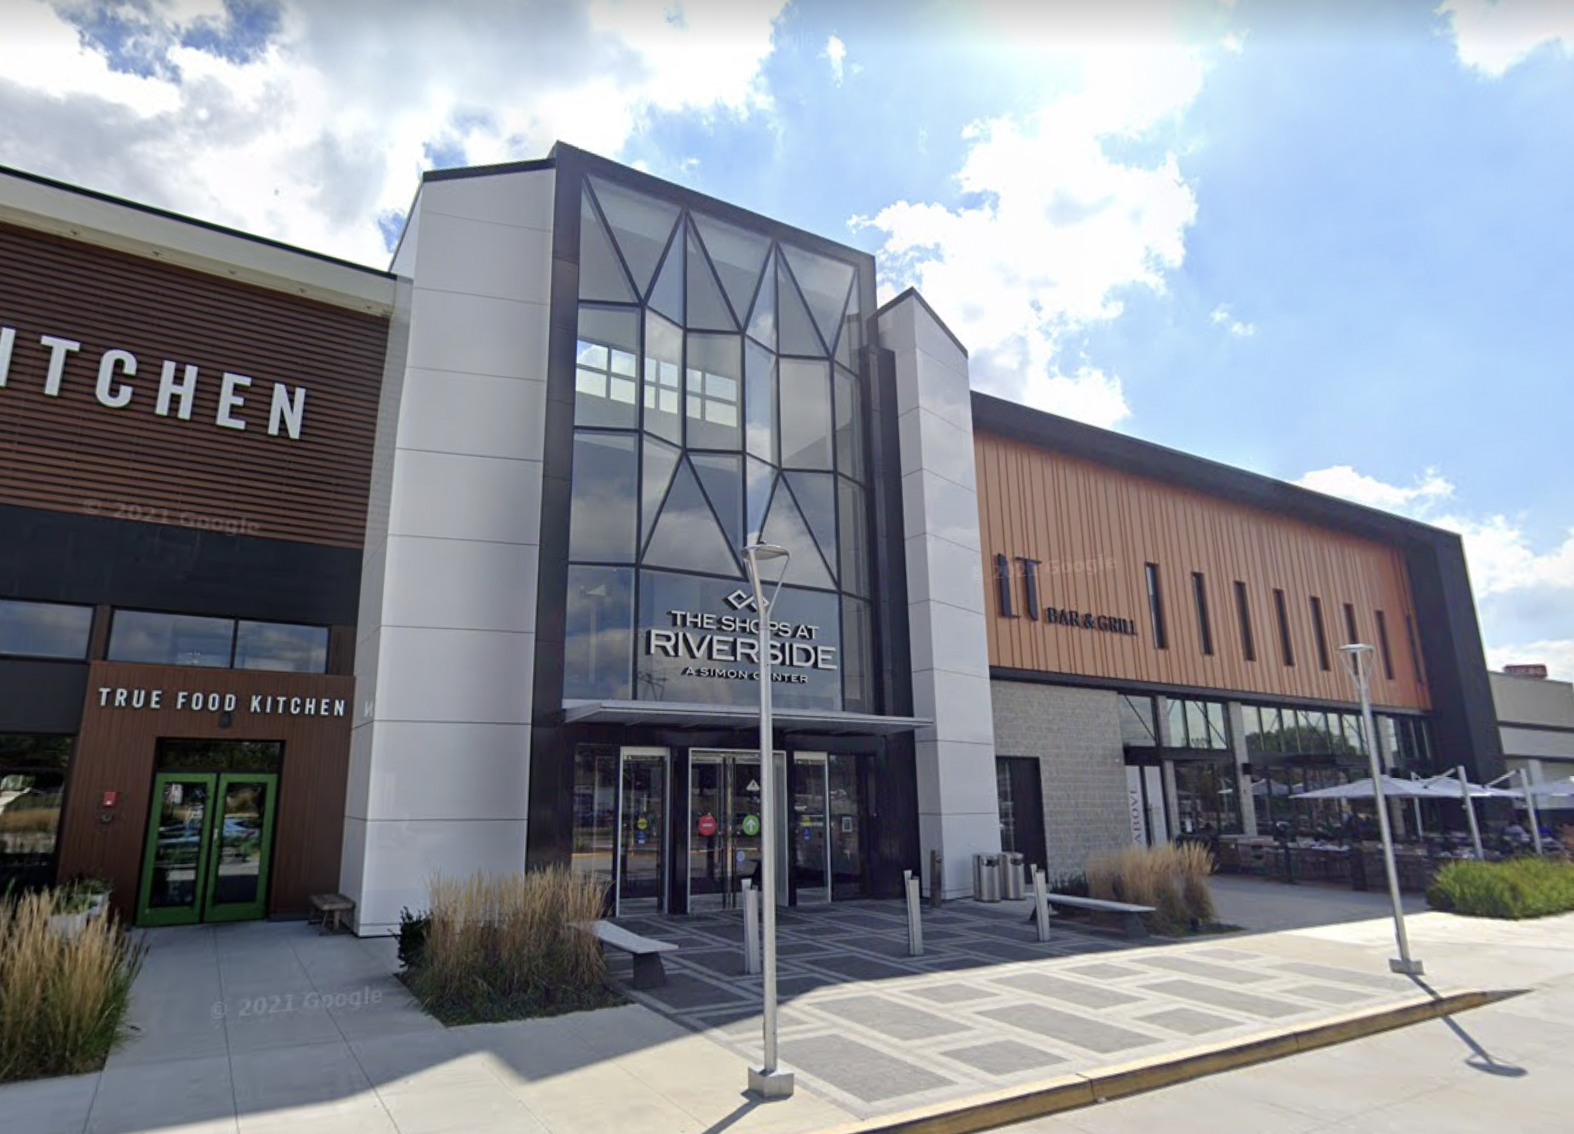 5 NJ mall employees overdose on fentanyl in parking garage